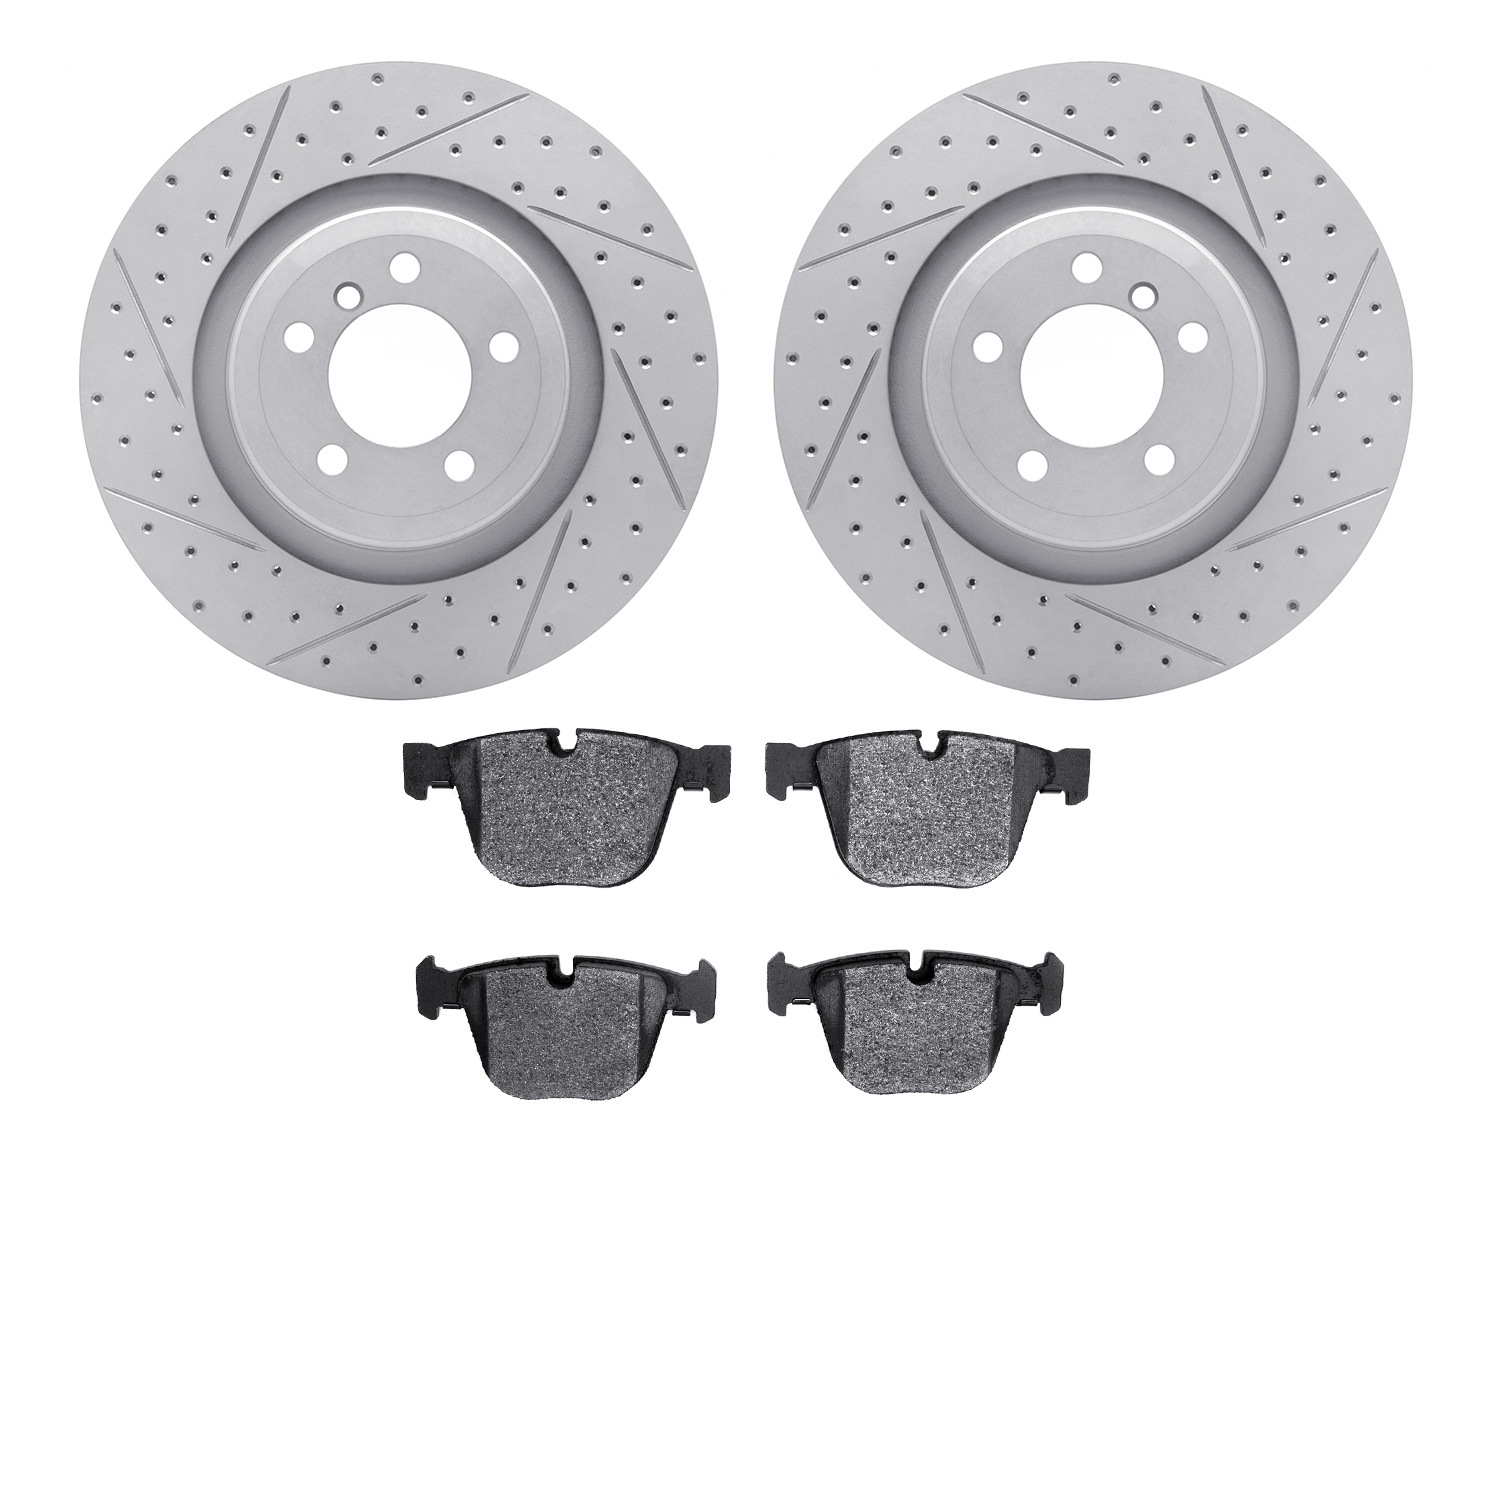 2502-31061 Geoperformance Drilled/Slotted Rotors w/5000 Advanced Brake Pads Kit, 2007-2008 BMW, Position: Rear